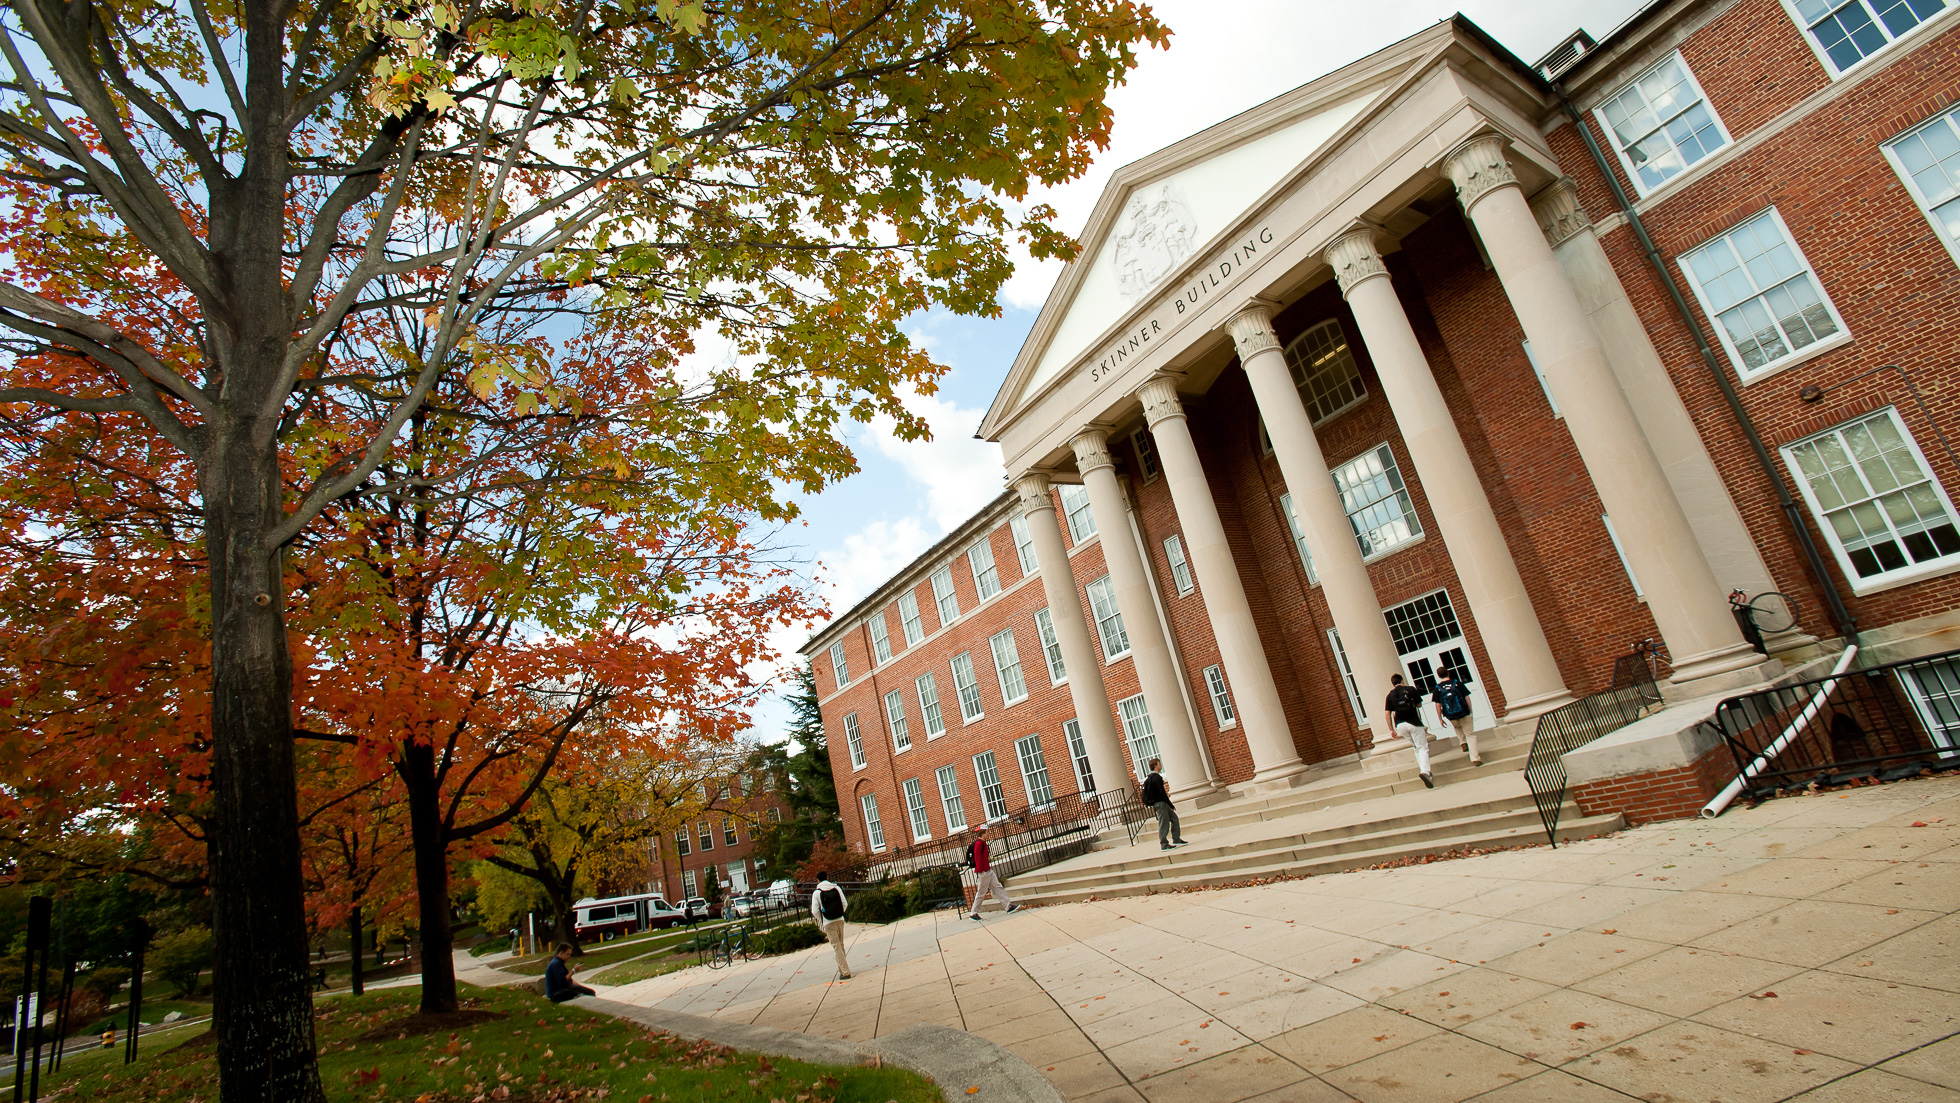 Skinner building at the University of Maryland